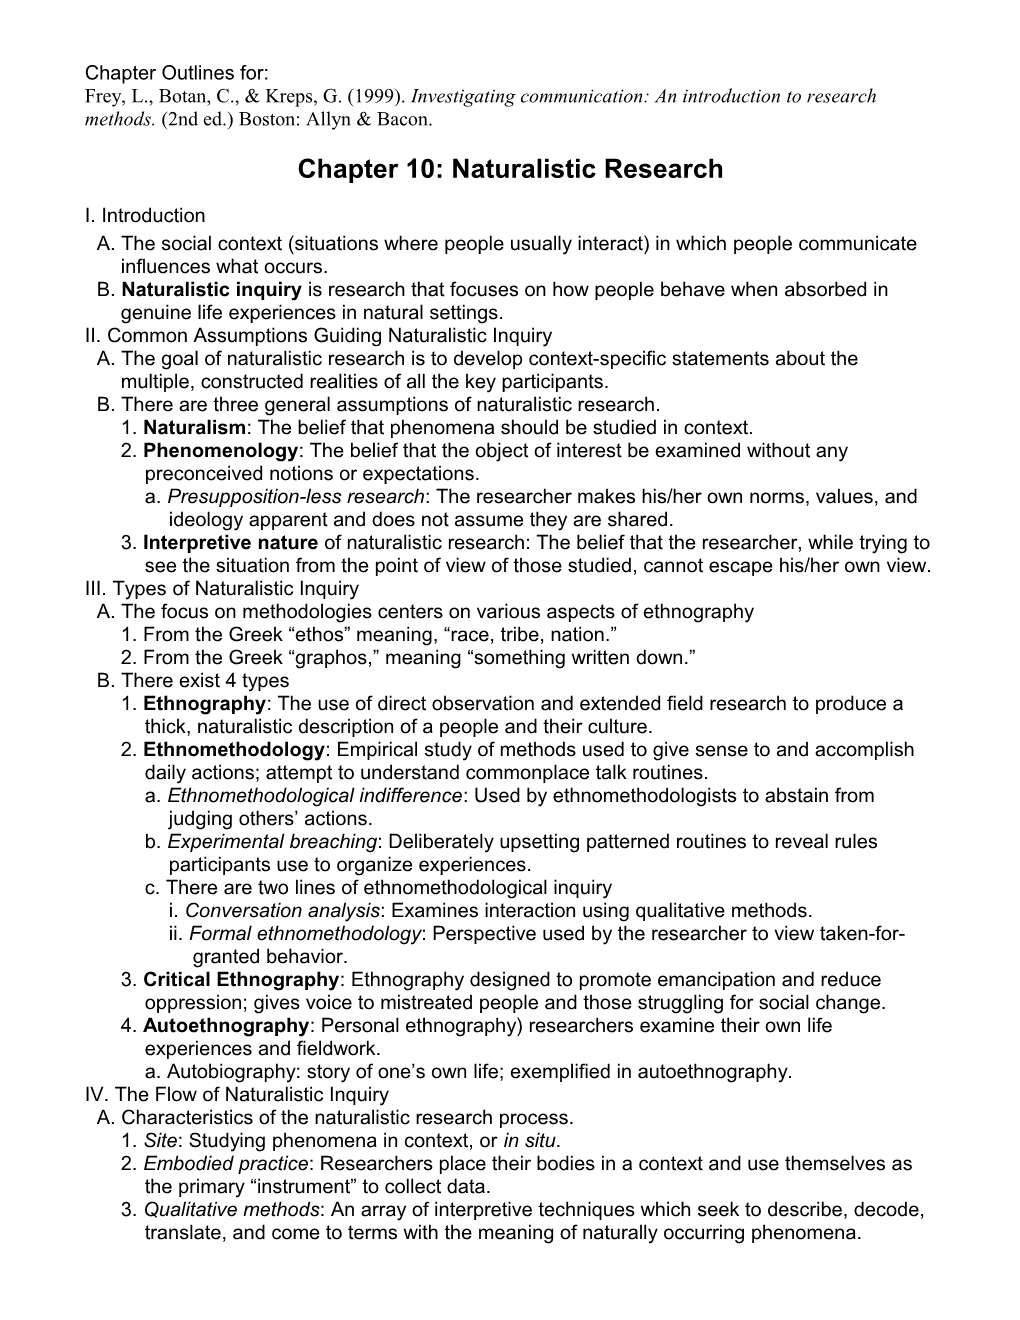 INVESTIGATING COMMUNICATION 2Nd Edition: CHAPTER OUTLINES s1